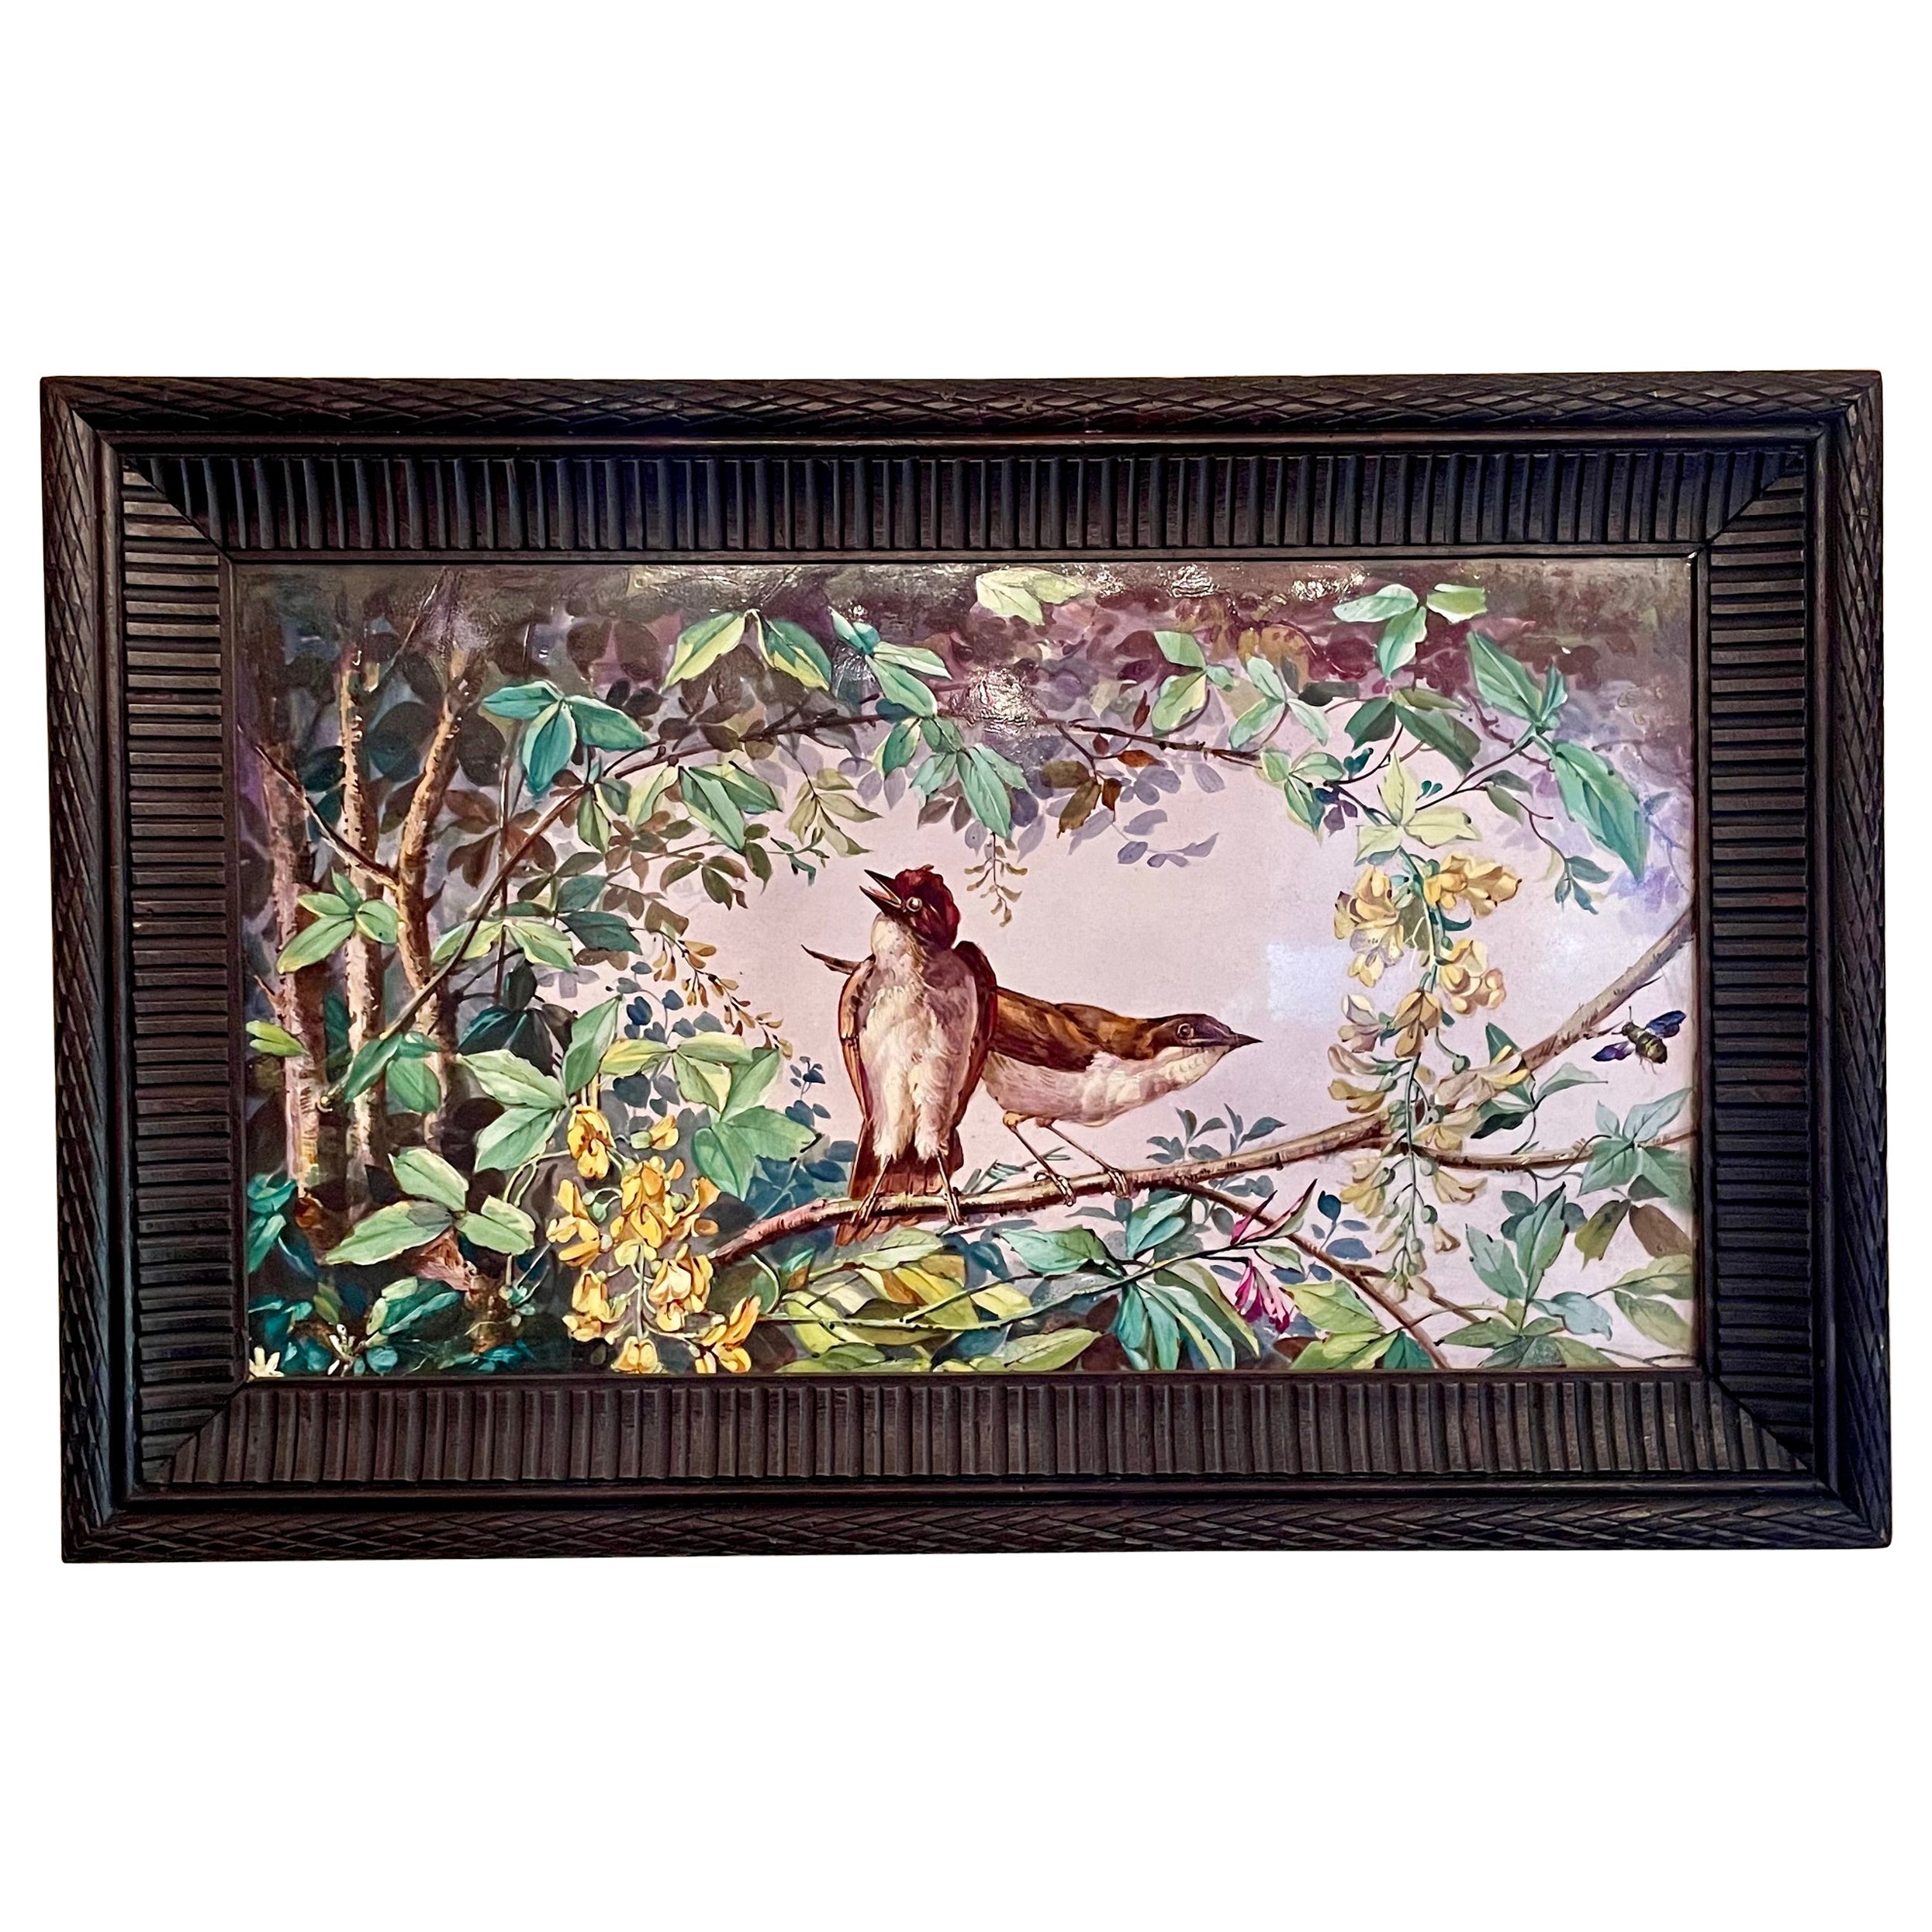 Framed Antique Painted Porcelain Wall Plaque of Birds on a Limb, Circa 1890-1900 For Sale